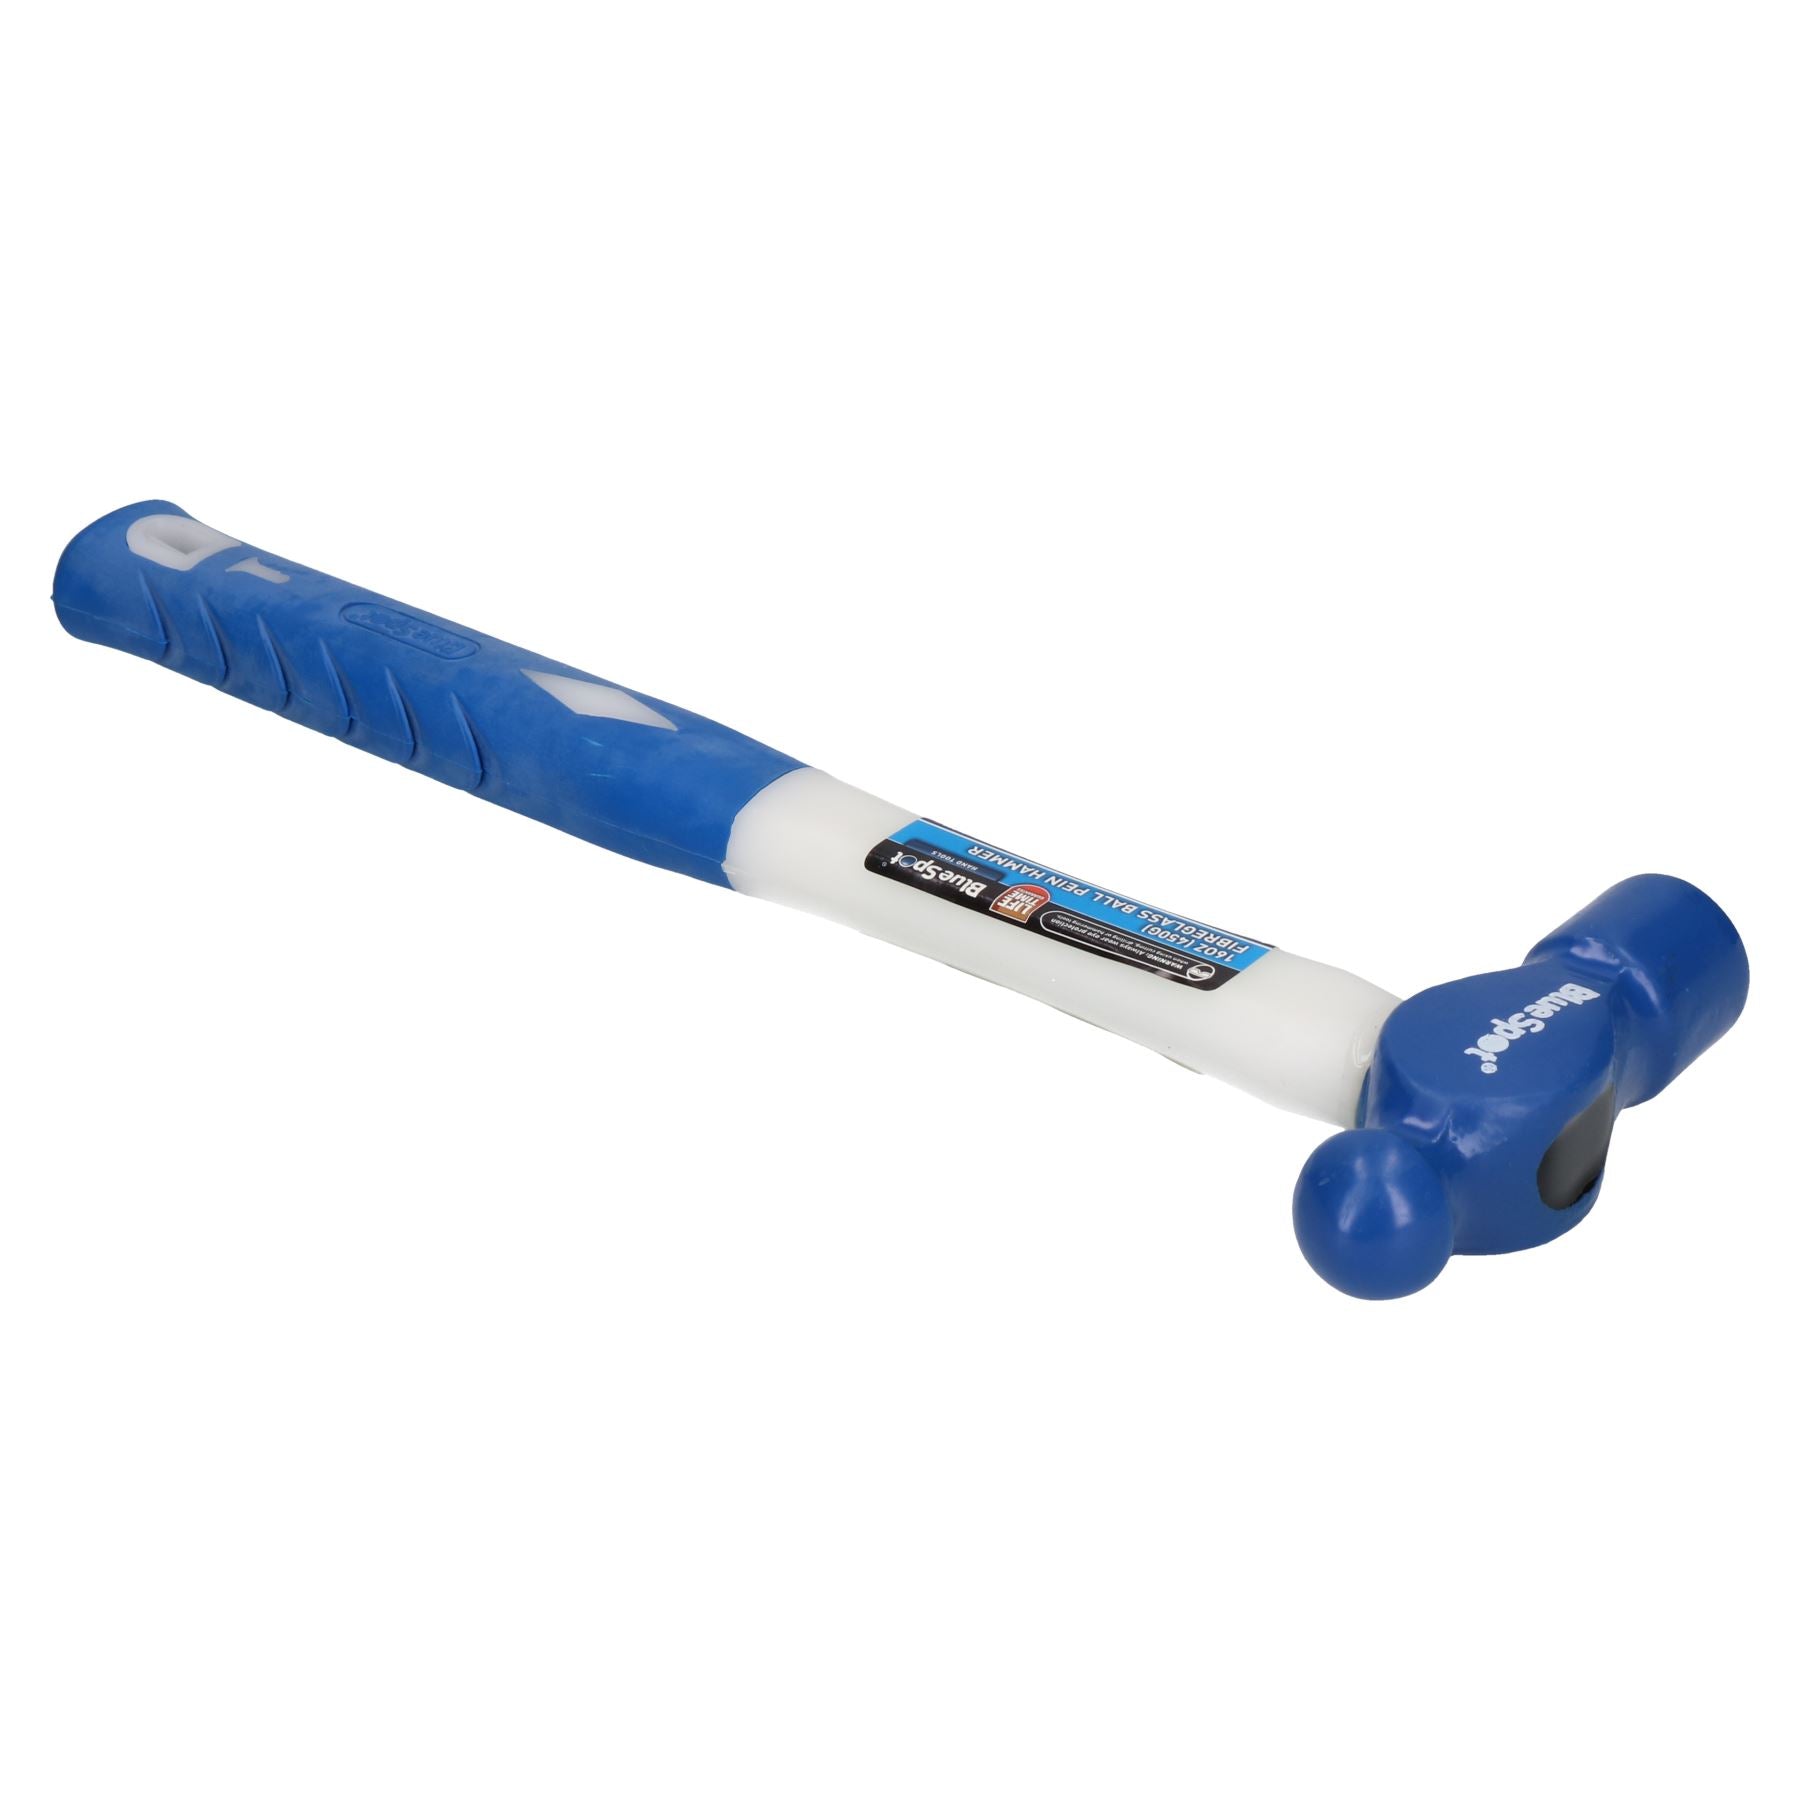 16oz (450g) Ball Pein Hammer with Fibreglass Shaft and TPR Rubberised Handle